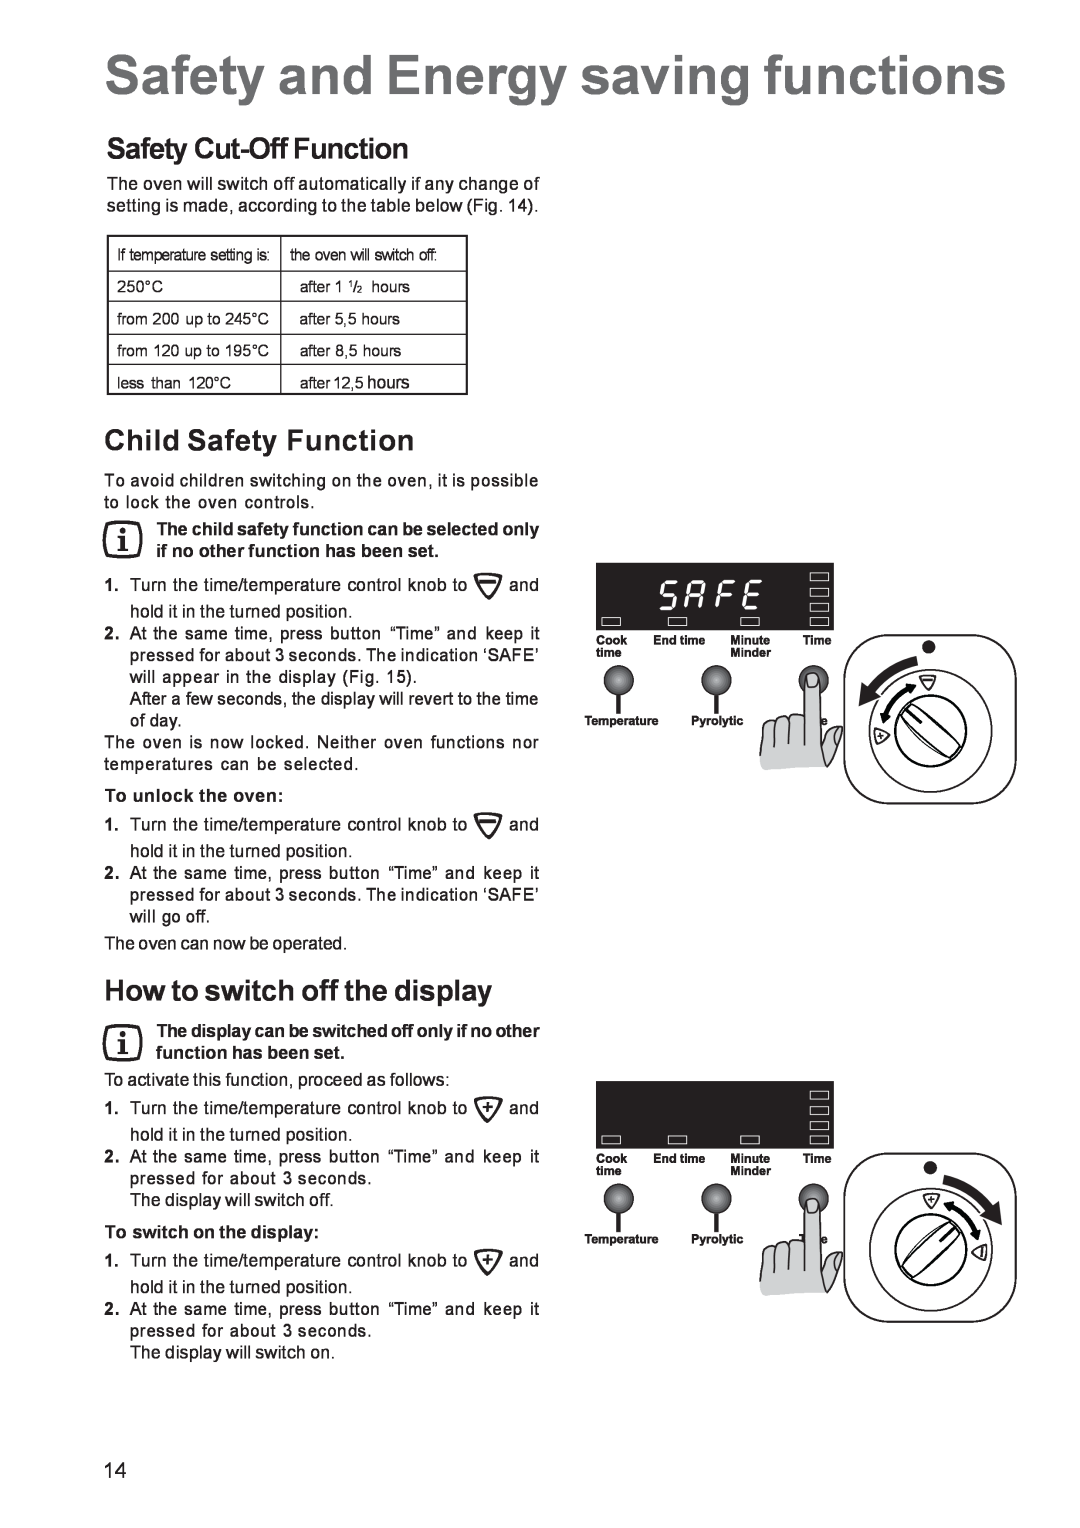 Zanussi ZCE 650 Safety and Energy saving functions, Safety Cut-Off Function, Child Safety Function, To unlock the oven 